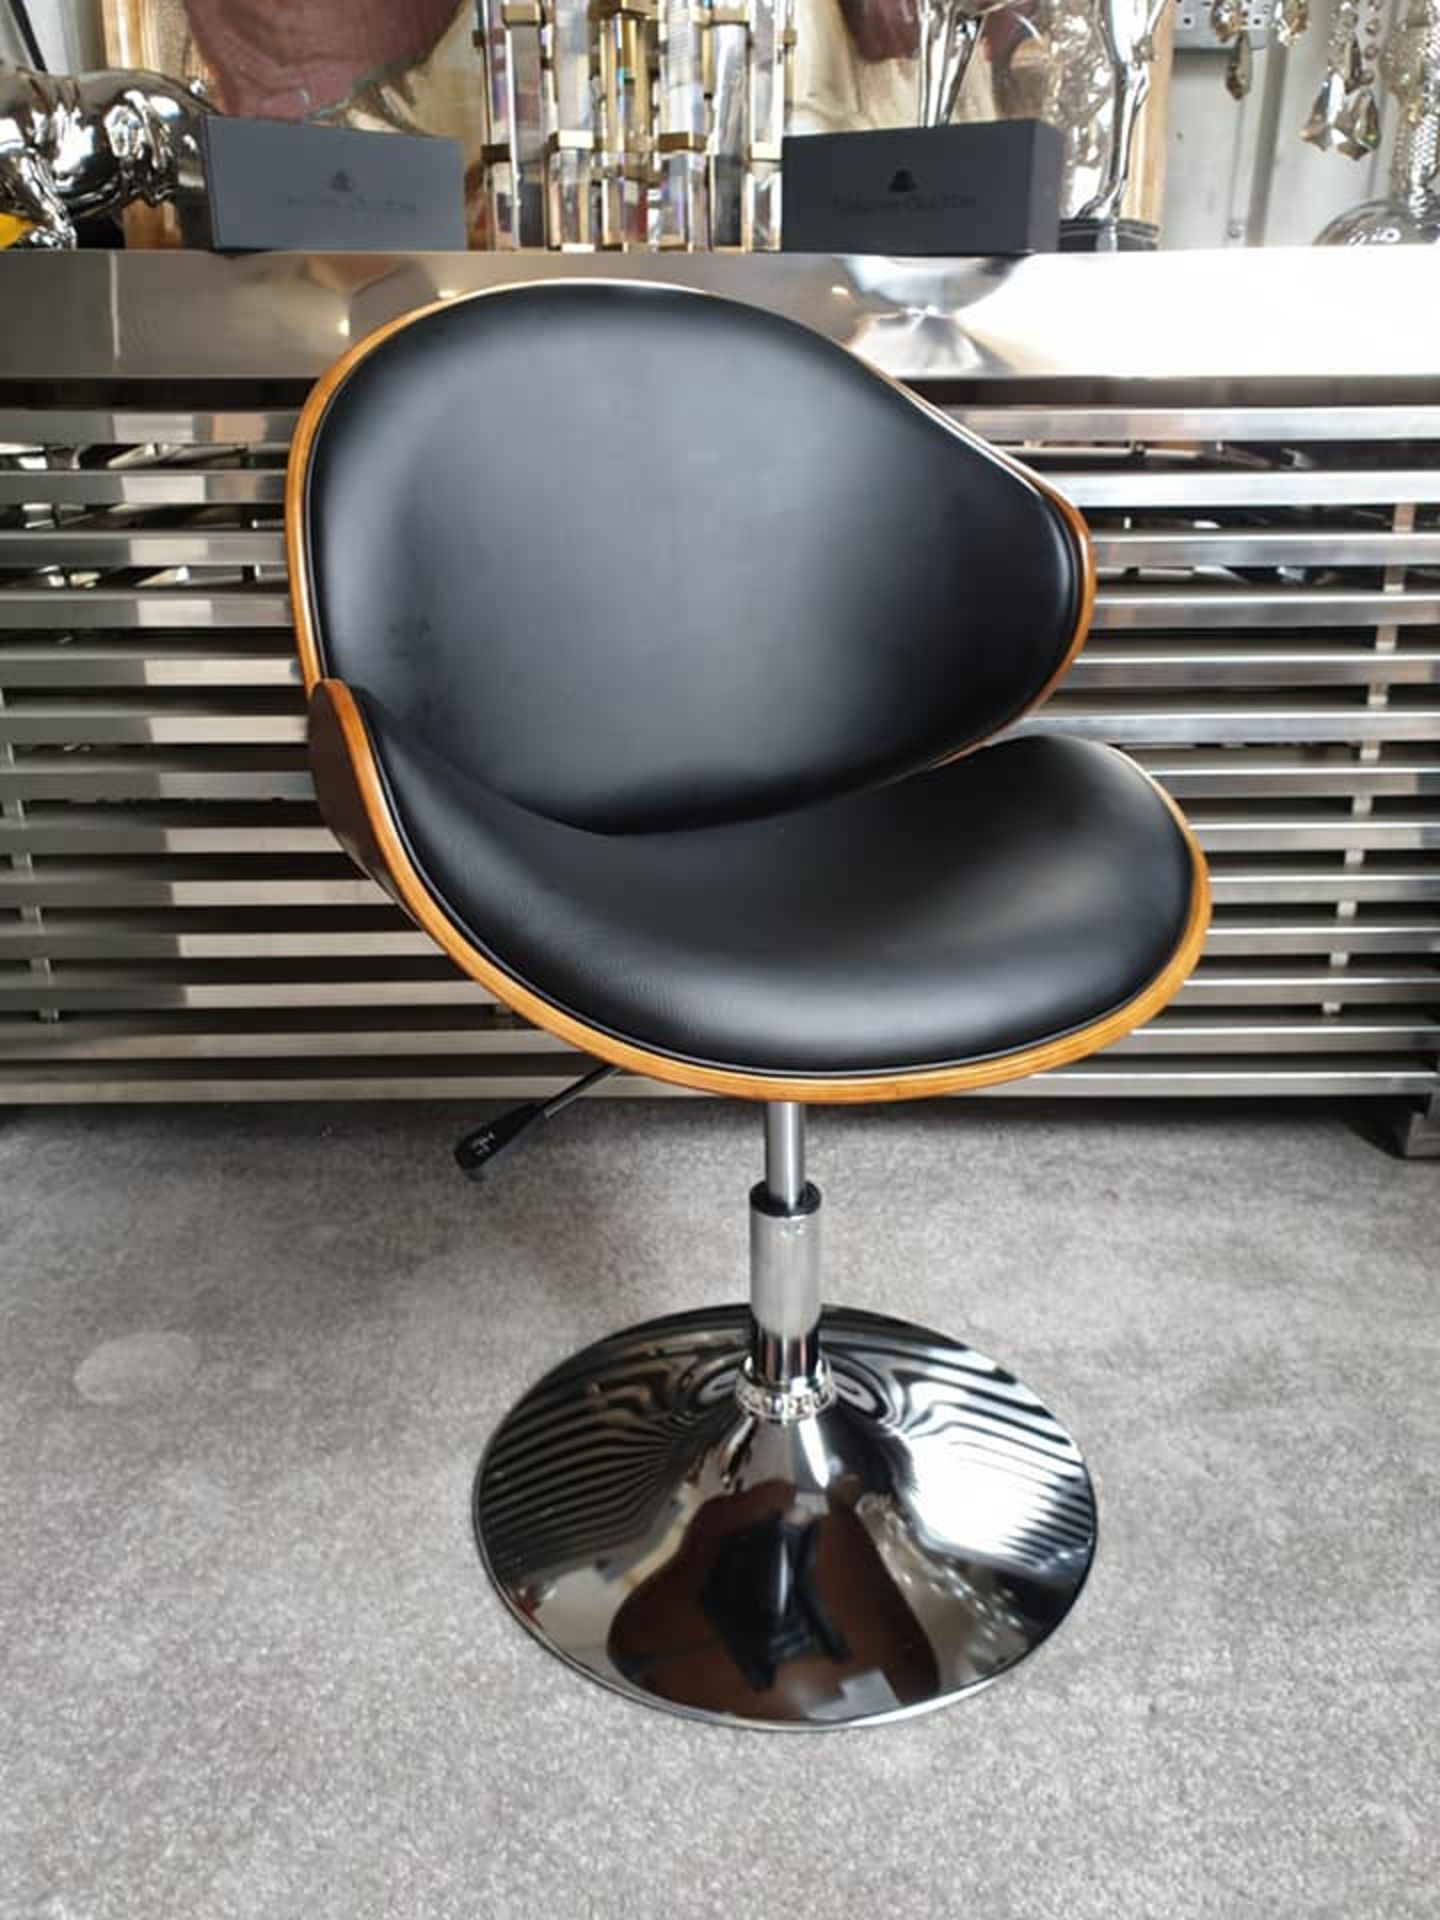 Century Upholstered Dining Chair Inspired By The Mid Century Modern Look This Contemporary And